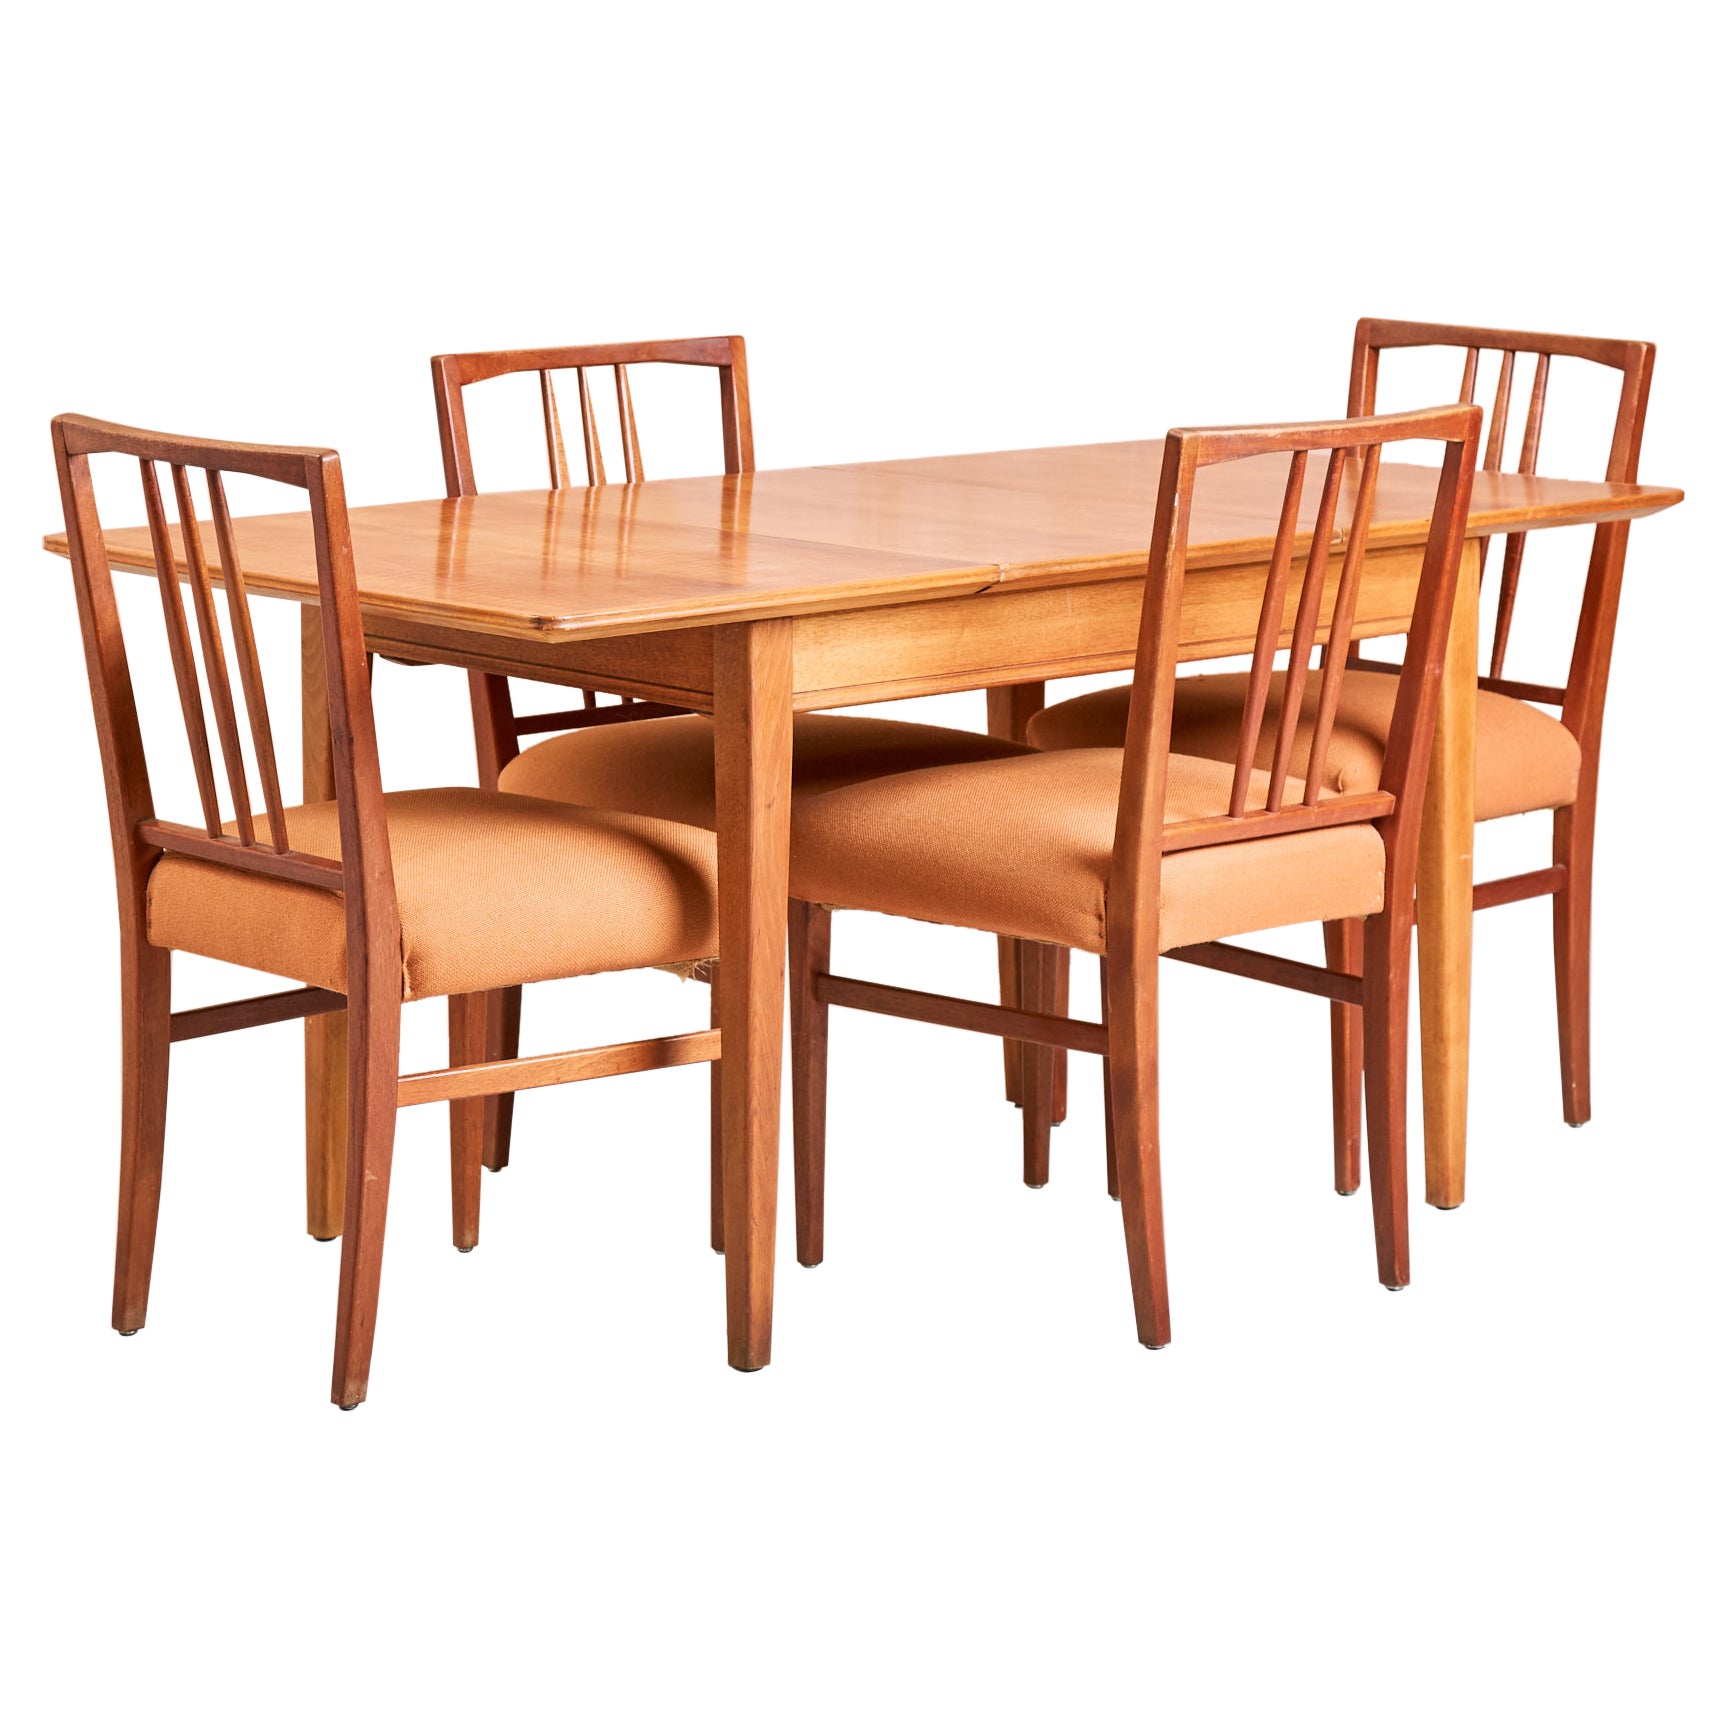 Vintage Mid-century Gordon Russell Oak Extending Dining Table and Chairs, 1950s For Sale